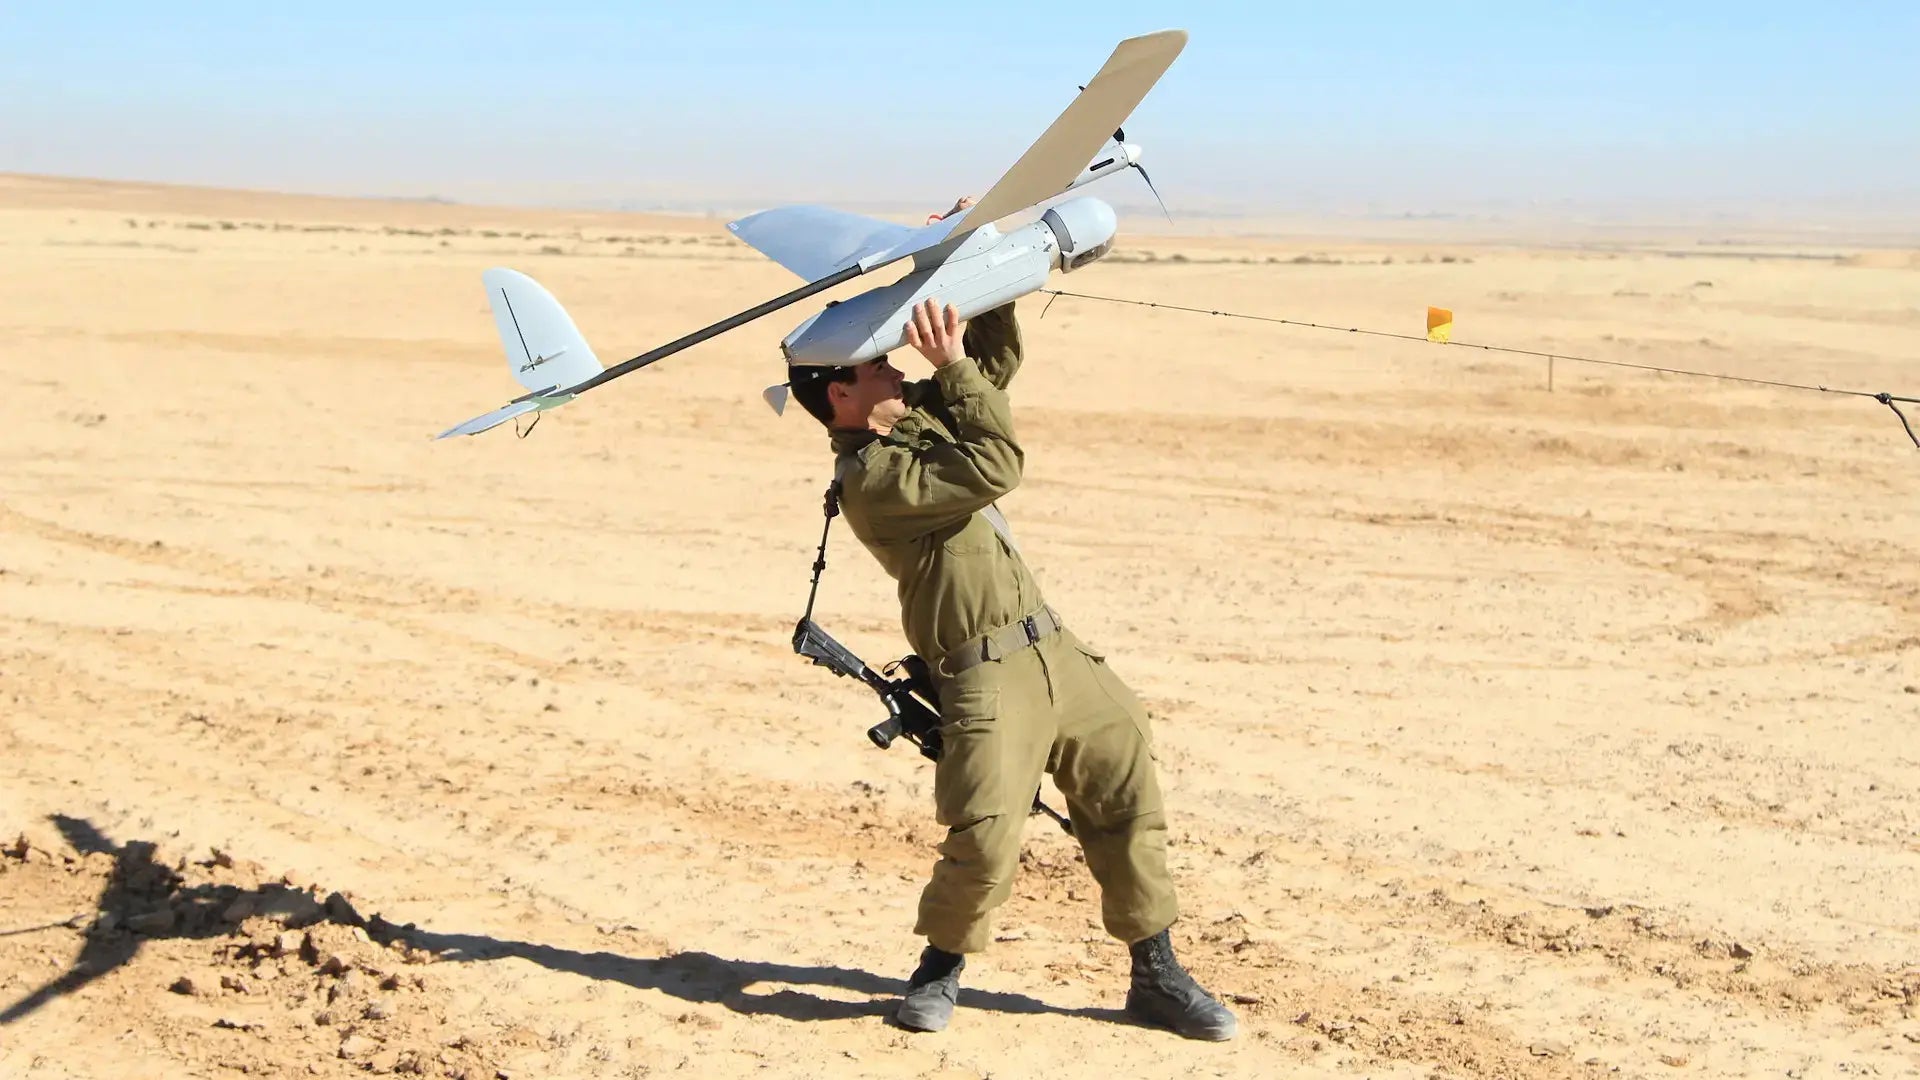 Counter-Unmanned Aerial Vehicles (C-UAS) photo